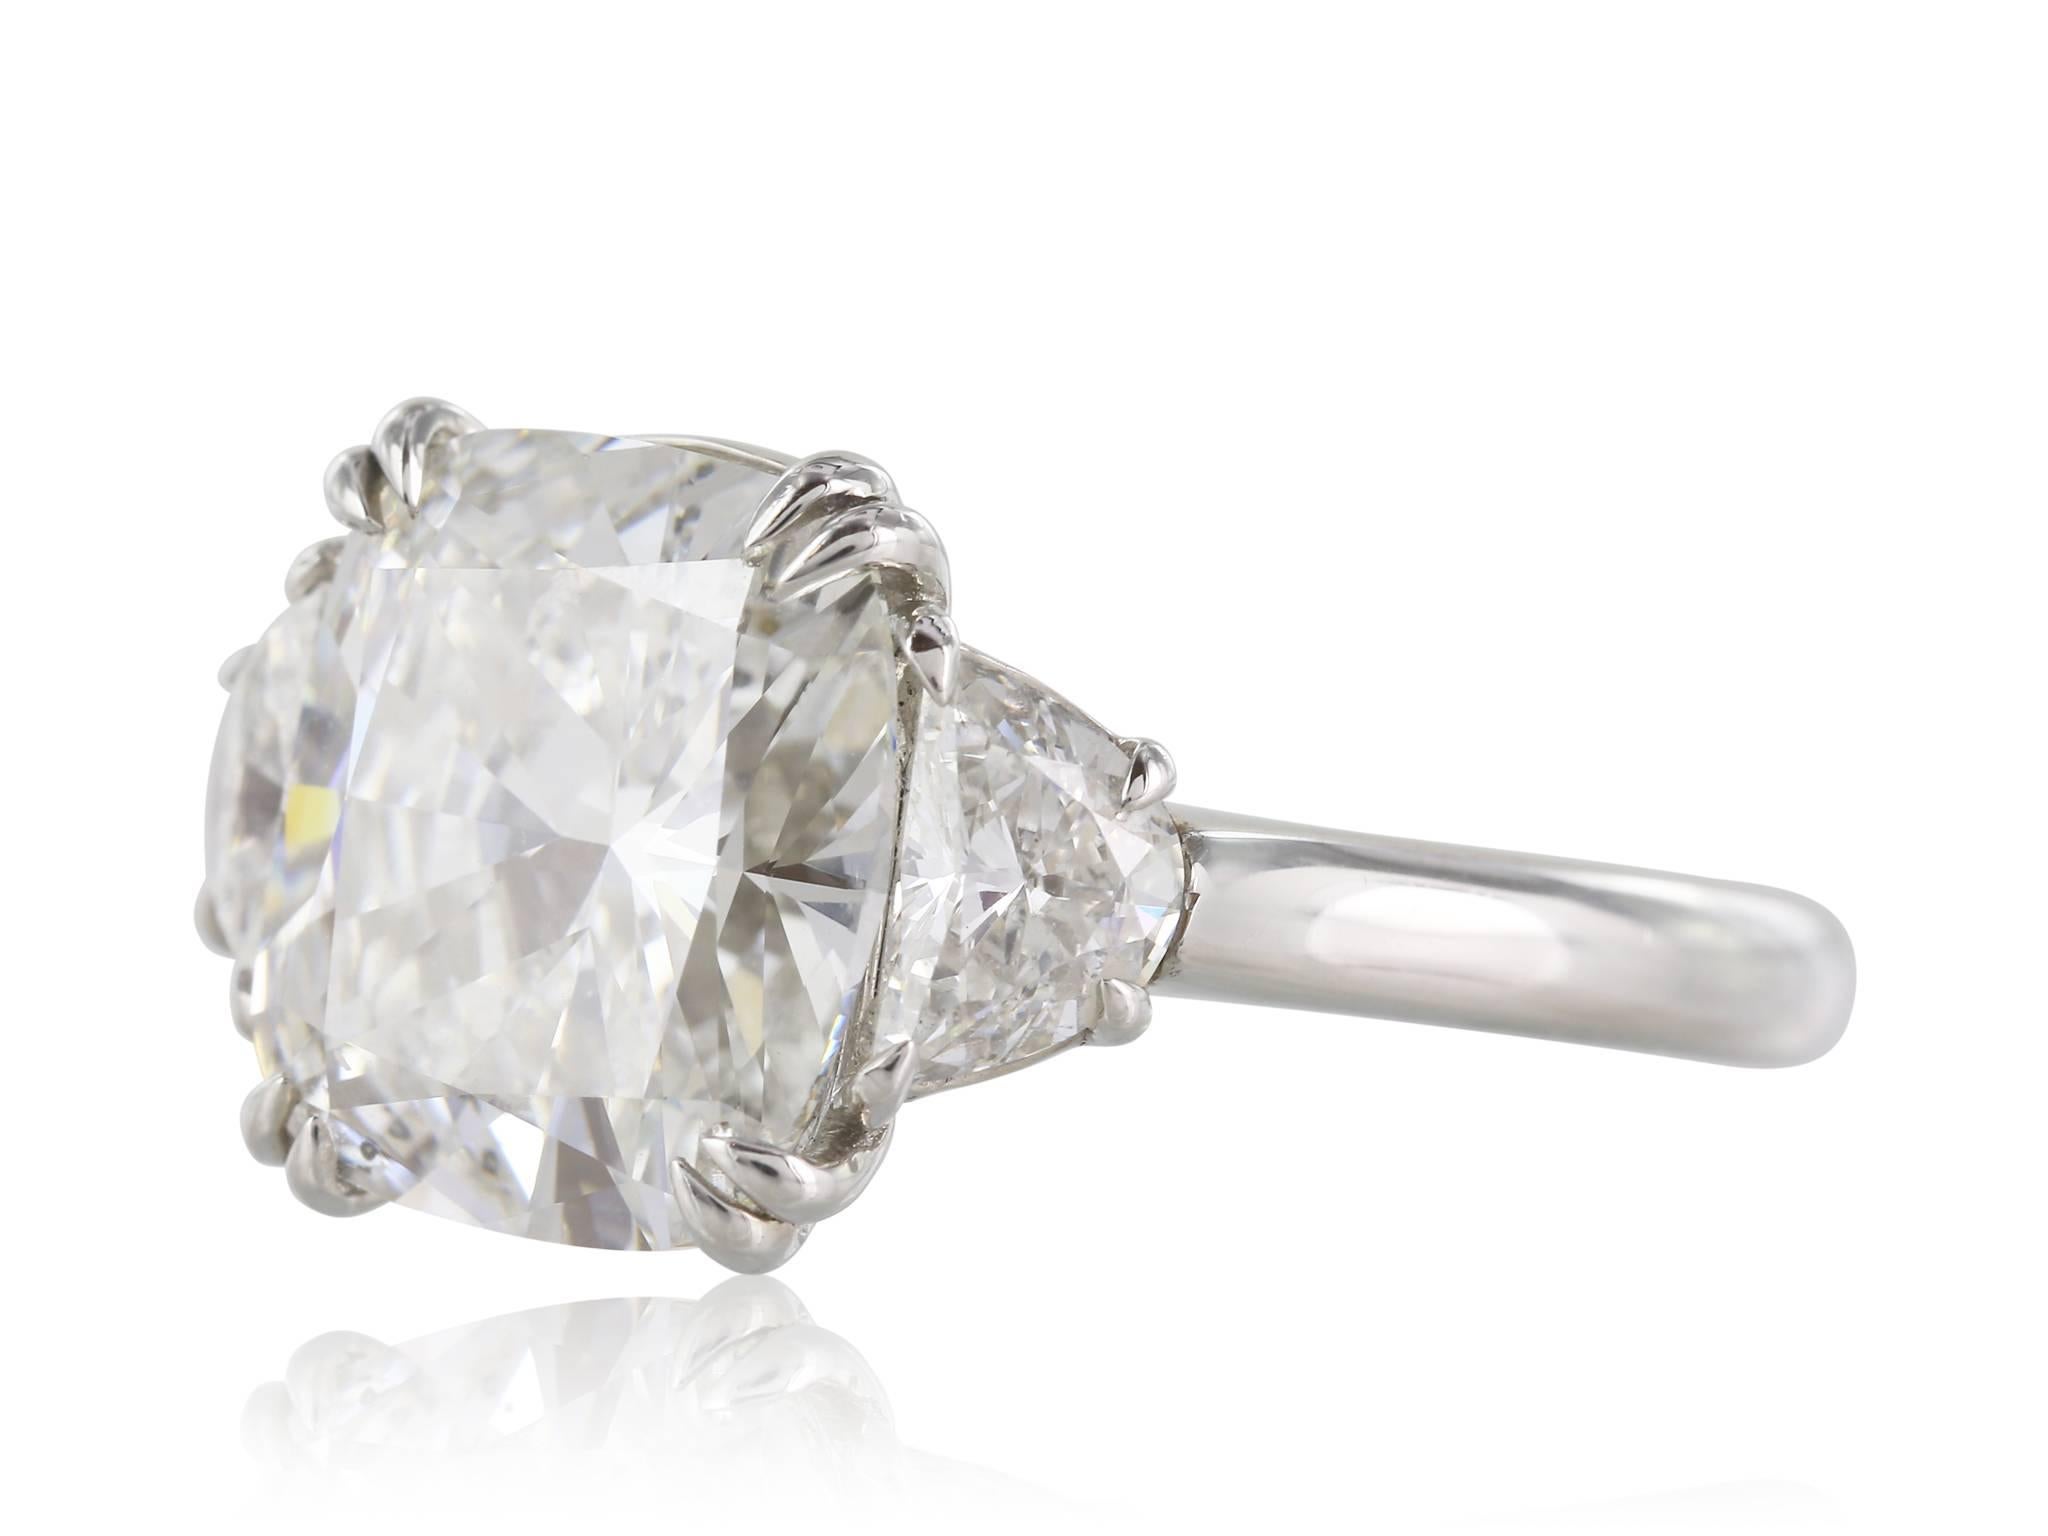 Platinum custom made Cushion cut Diamond weighing 4.01 carats with a GIA #1172206894 G SI2 flanked by a pair of half moon cut diamonds having a total weight of 0.80 carats set in a three stone engagment Ring